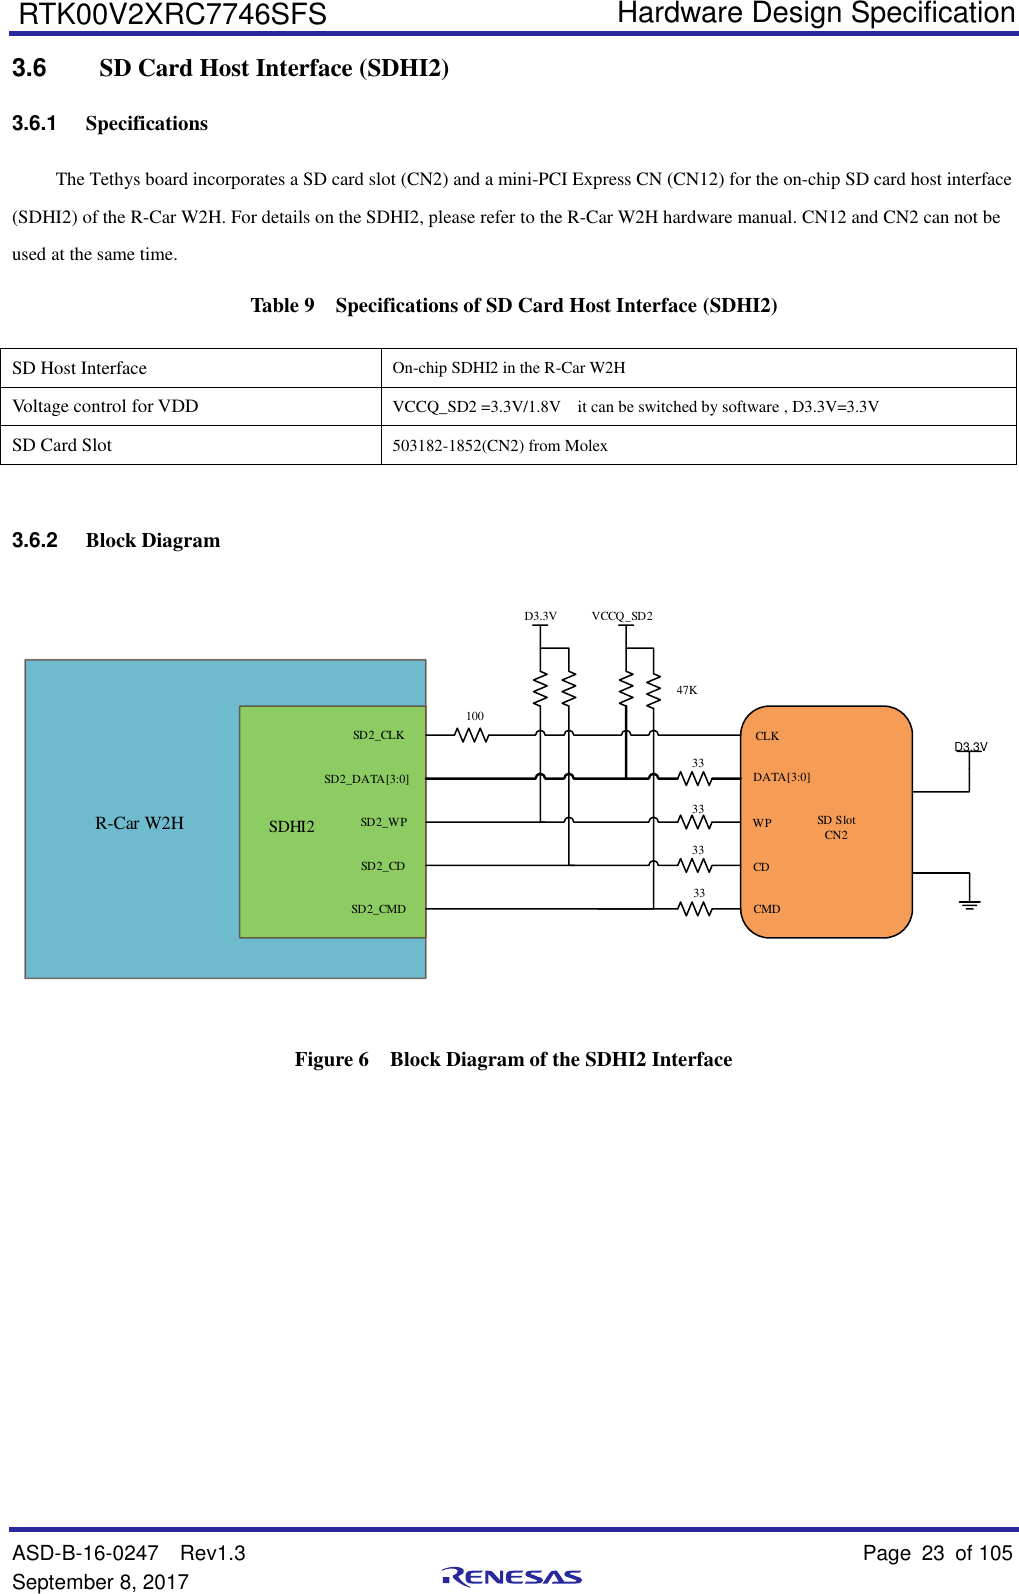   Hardware Design Specification ASD-B-16-0247  Rev1.3    Page 23  of 105 September 8, 2017      RTK00V2XRC7746SFS 3.6   SD Card Host Interface (SDHI2) 3.6.1 Specifications The Tethys board incorporates a SD card slot (CN2) and a mini-PCI Express CN (CN12) for the on-chip SD card host interface (SDHI2) of the R-Car W2H. For details on the SDHI2, please refer to the R-Car W2H hardware manual. CN12 and CN2 can not be used at the same time. Table 9  Specifications of SD Card Host Interface (SDHI2) SD Host Interface On-chip SDHI2 in the R-Car W2H Voltage control for VDD VCCQ_SD2 =3.3V/1.8V    it can be switched by software , D3.3V=3.3V SD Card Slot 503182-1852(CN2) from Molex  3.6.2 Block Diagram R-Car W2H SDHI2SD2_CLKSD2_DATA[3:0]SD2_CDSD2_WPSD2_CMDVCCQ_SD247K10033333333CLKDATA[3:0]WPCDCMDSD SlotCN2D3.3VD3.3V Figure 6  Block Diagram of the SDHI2 Interface           